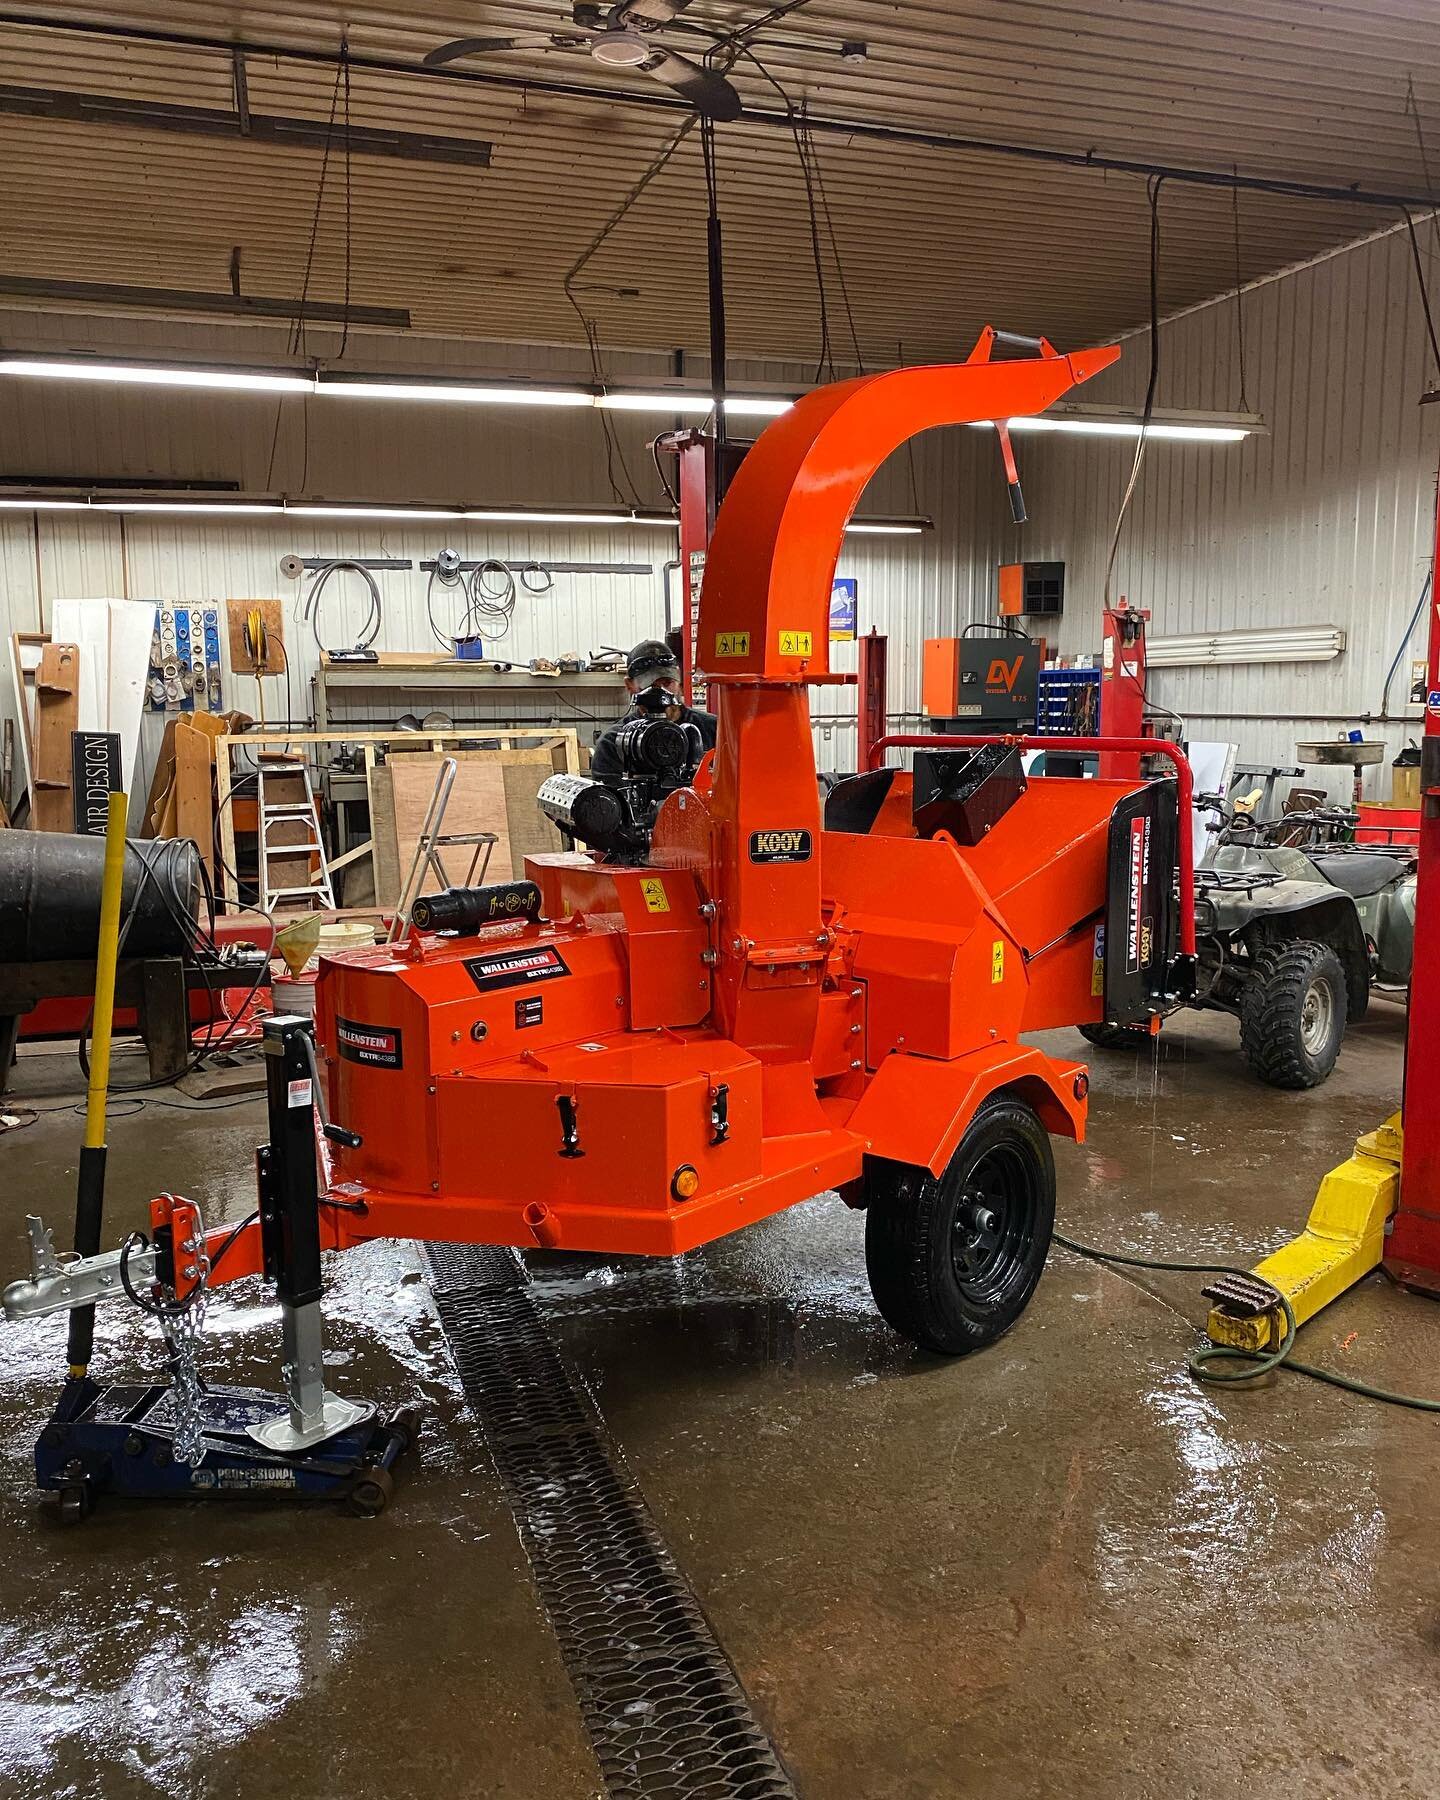 I&rsquo;m happy to announce that we&rsquo;ve just received our new chipper. We are very excited to put it to good use for the 2023 season. If you haven&rsquo;t already, check out our website www.arboristalliance.ca and sign up to our free chip dump p